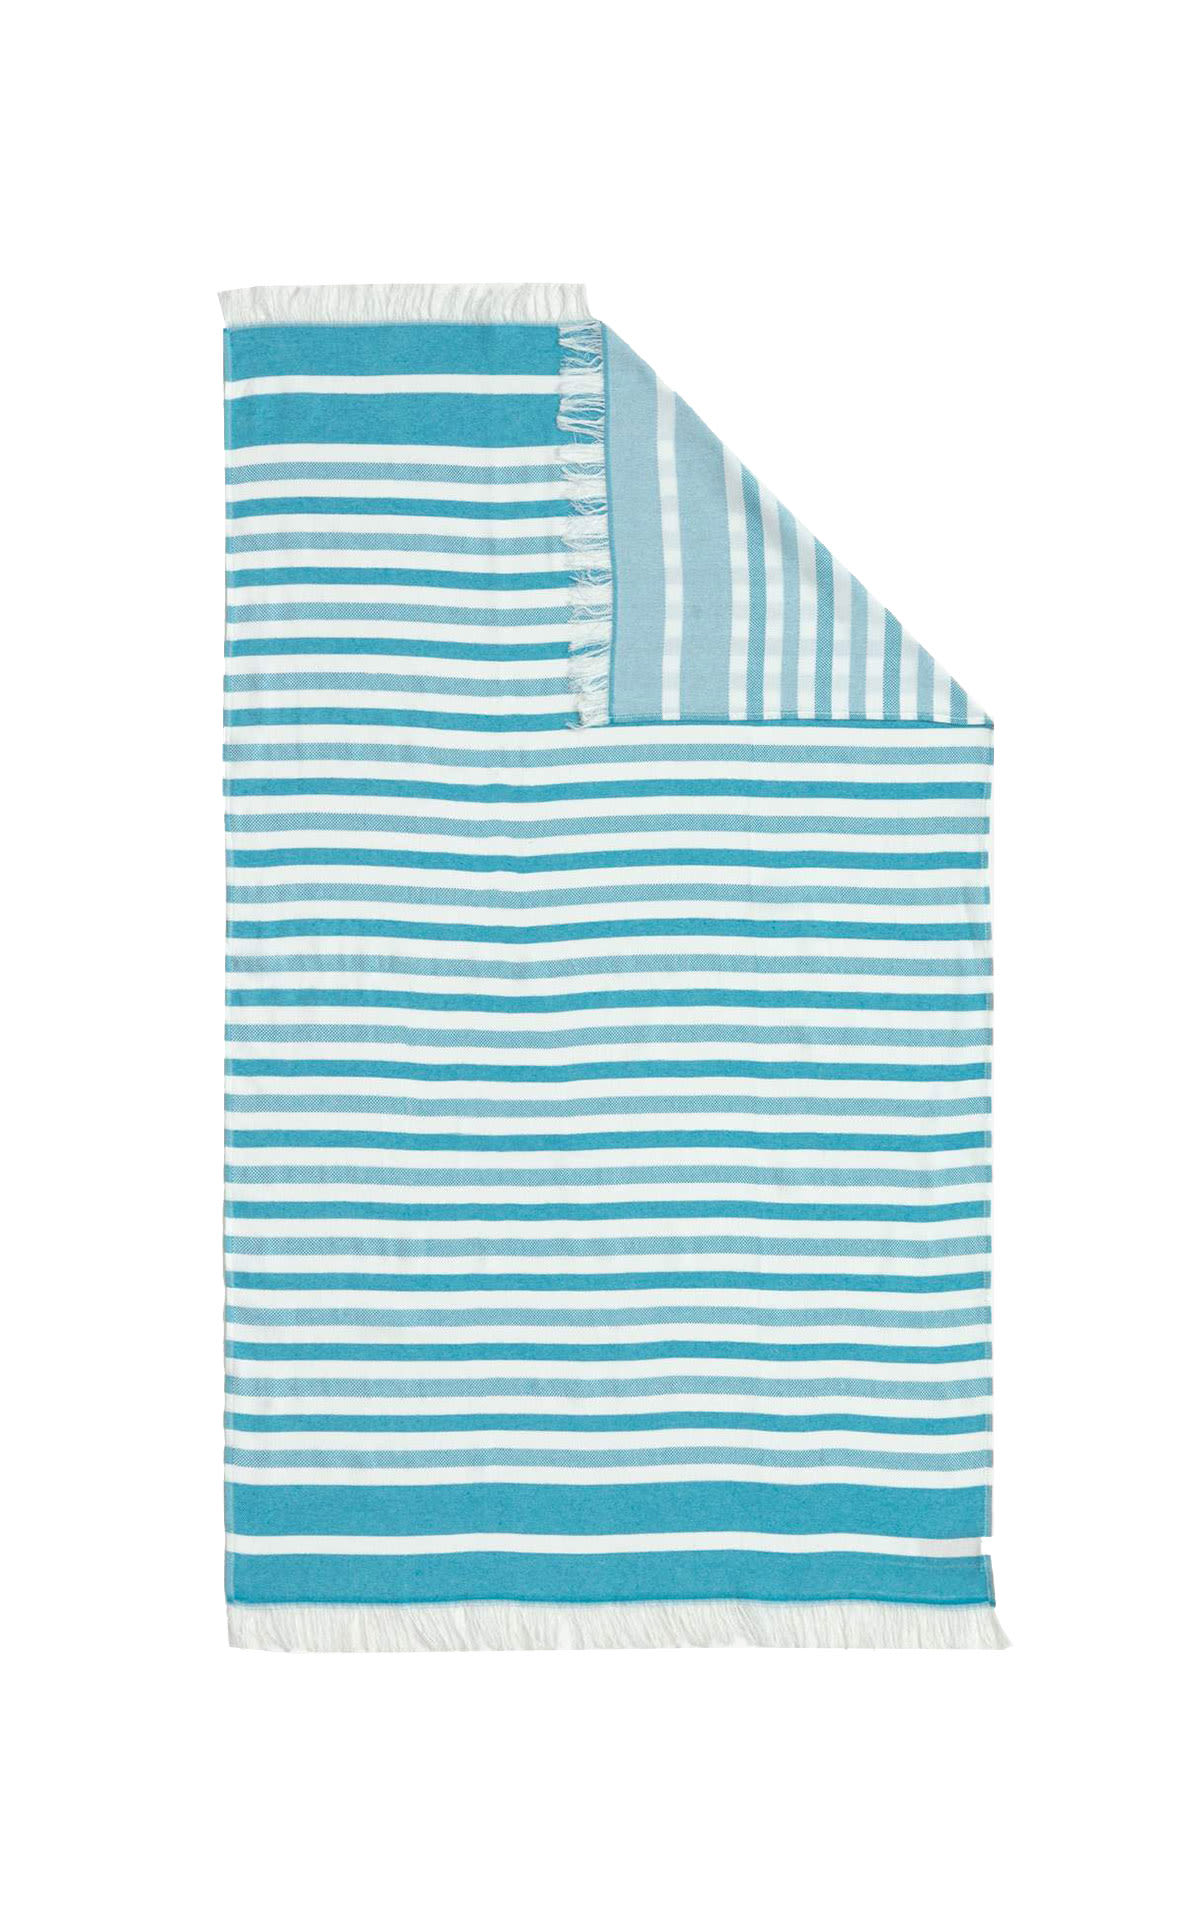 Blue and white striped towel textura